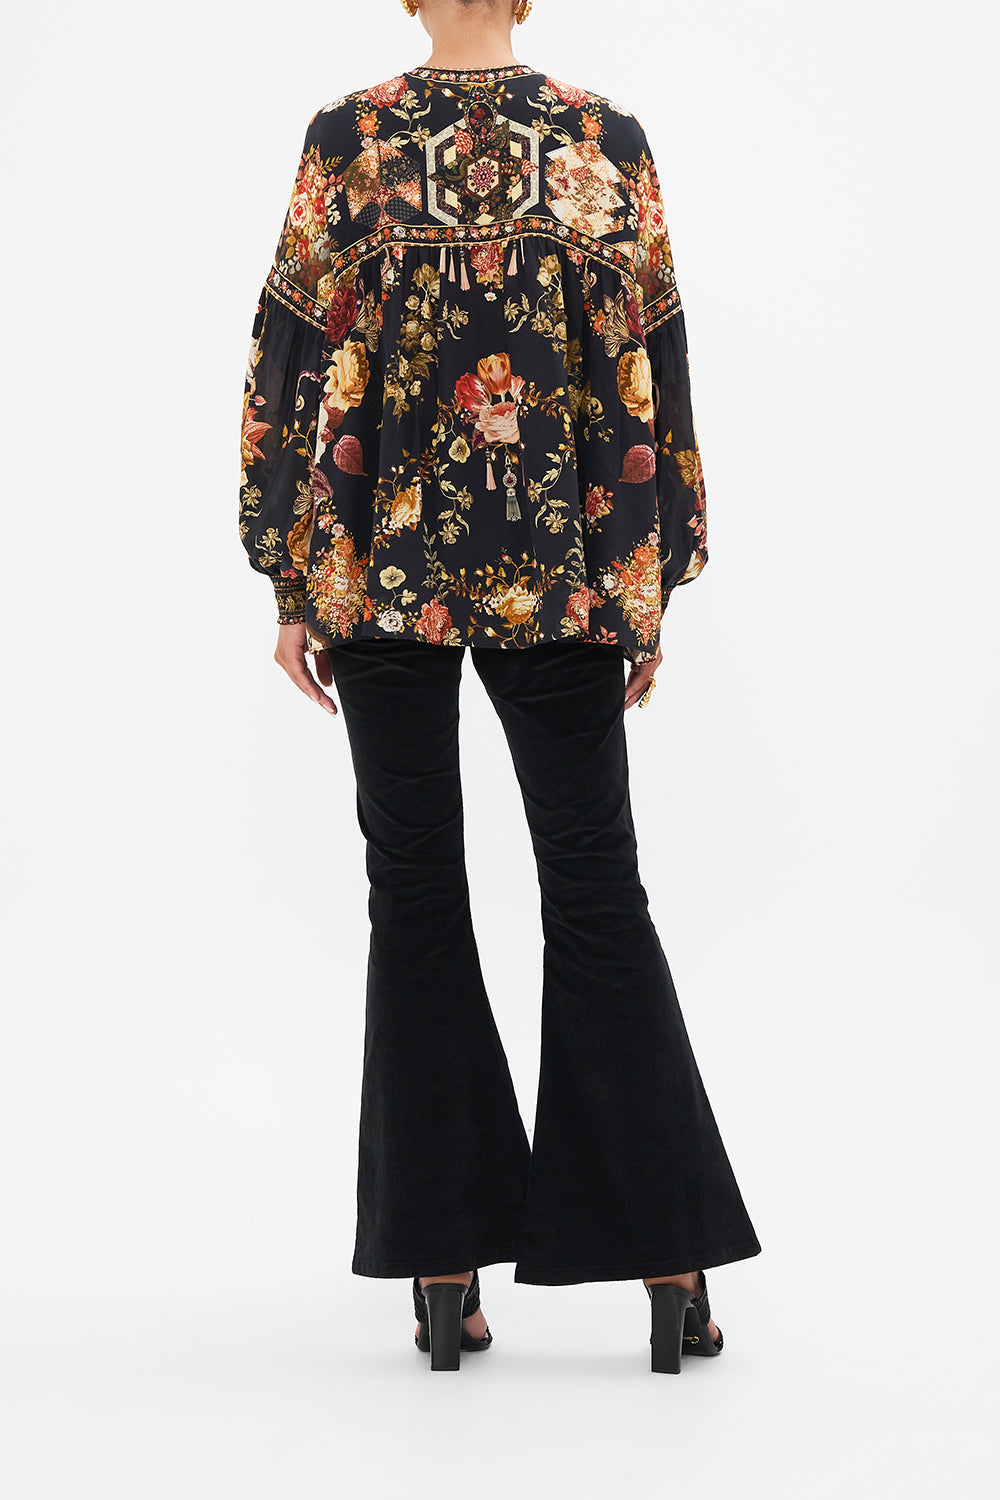 CAMILLA Floral Blouson Blouse with Neck Tie in Stitched in Time print